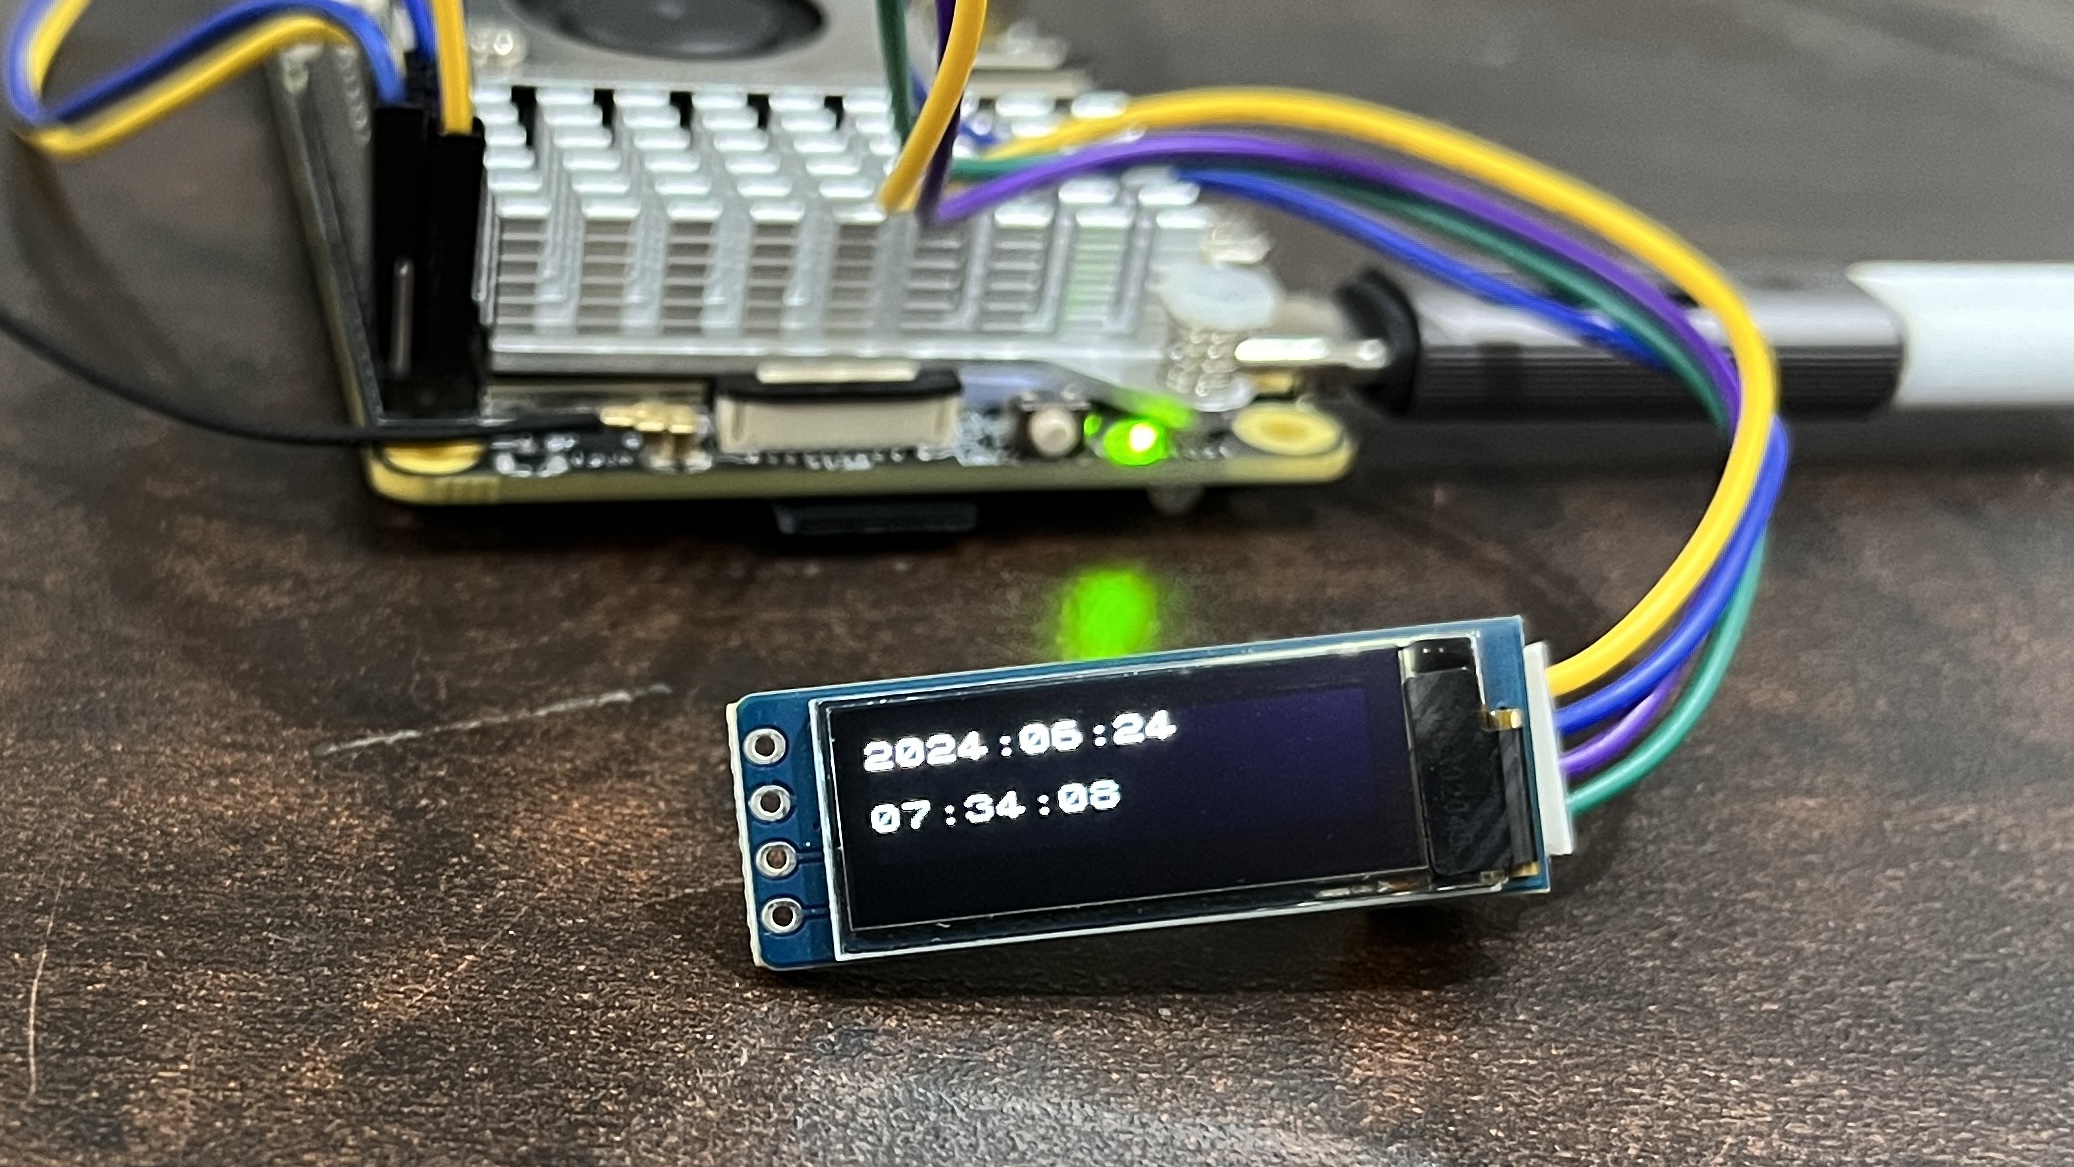 Date & Time on 128x32 OLED